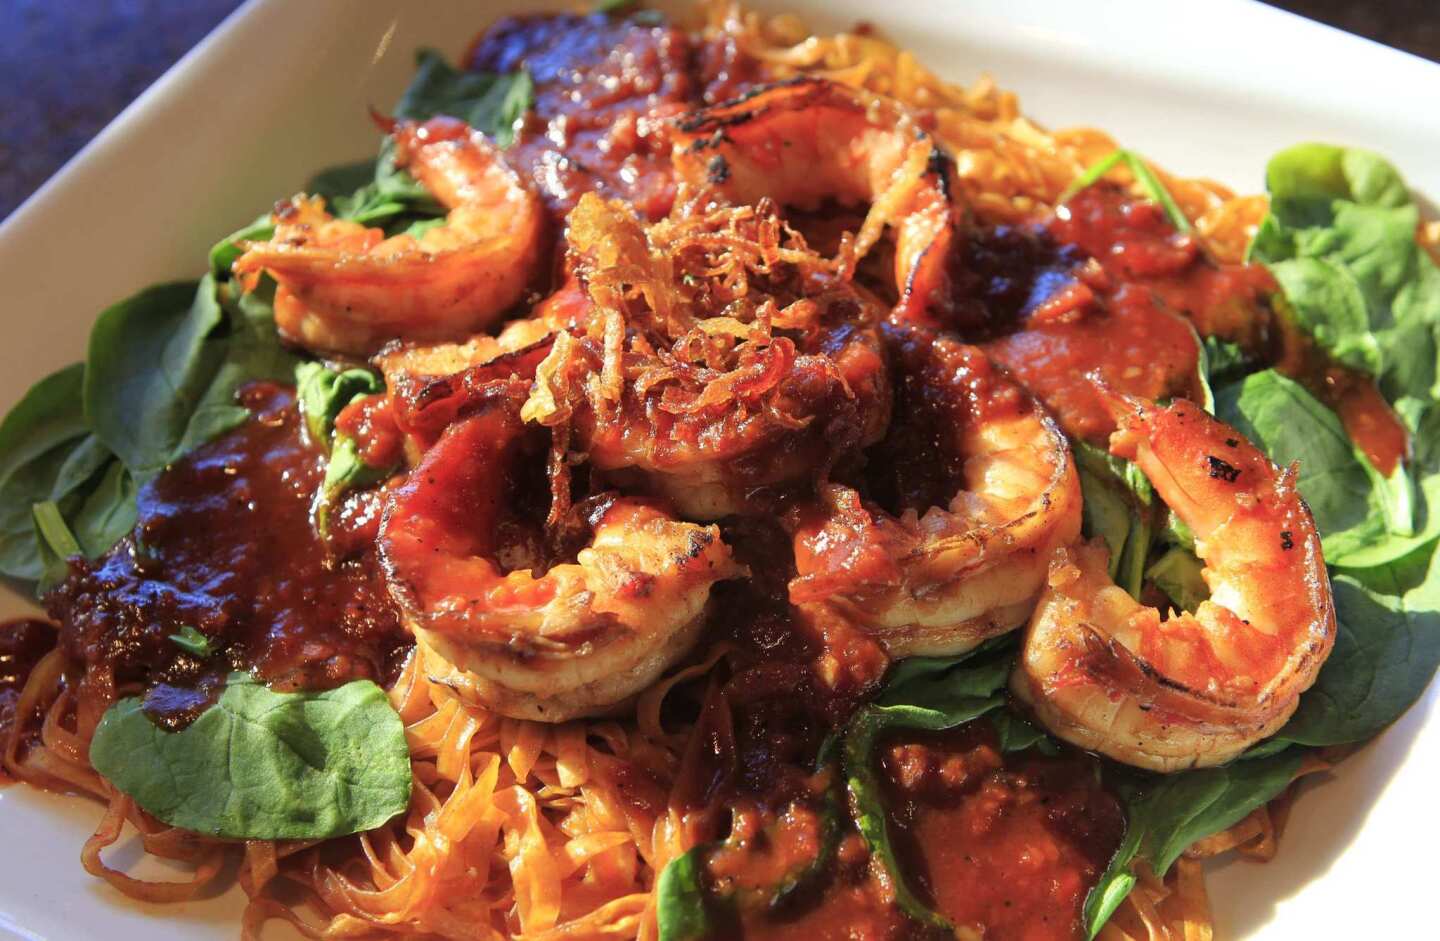 Dan's special garlic noodles with grilled prawns is a favorite.